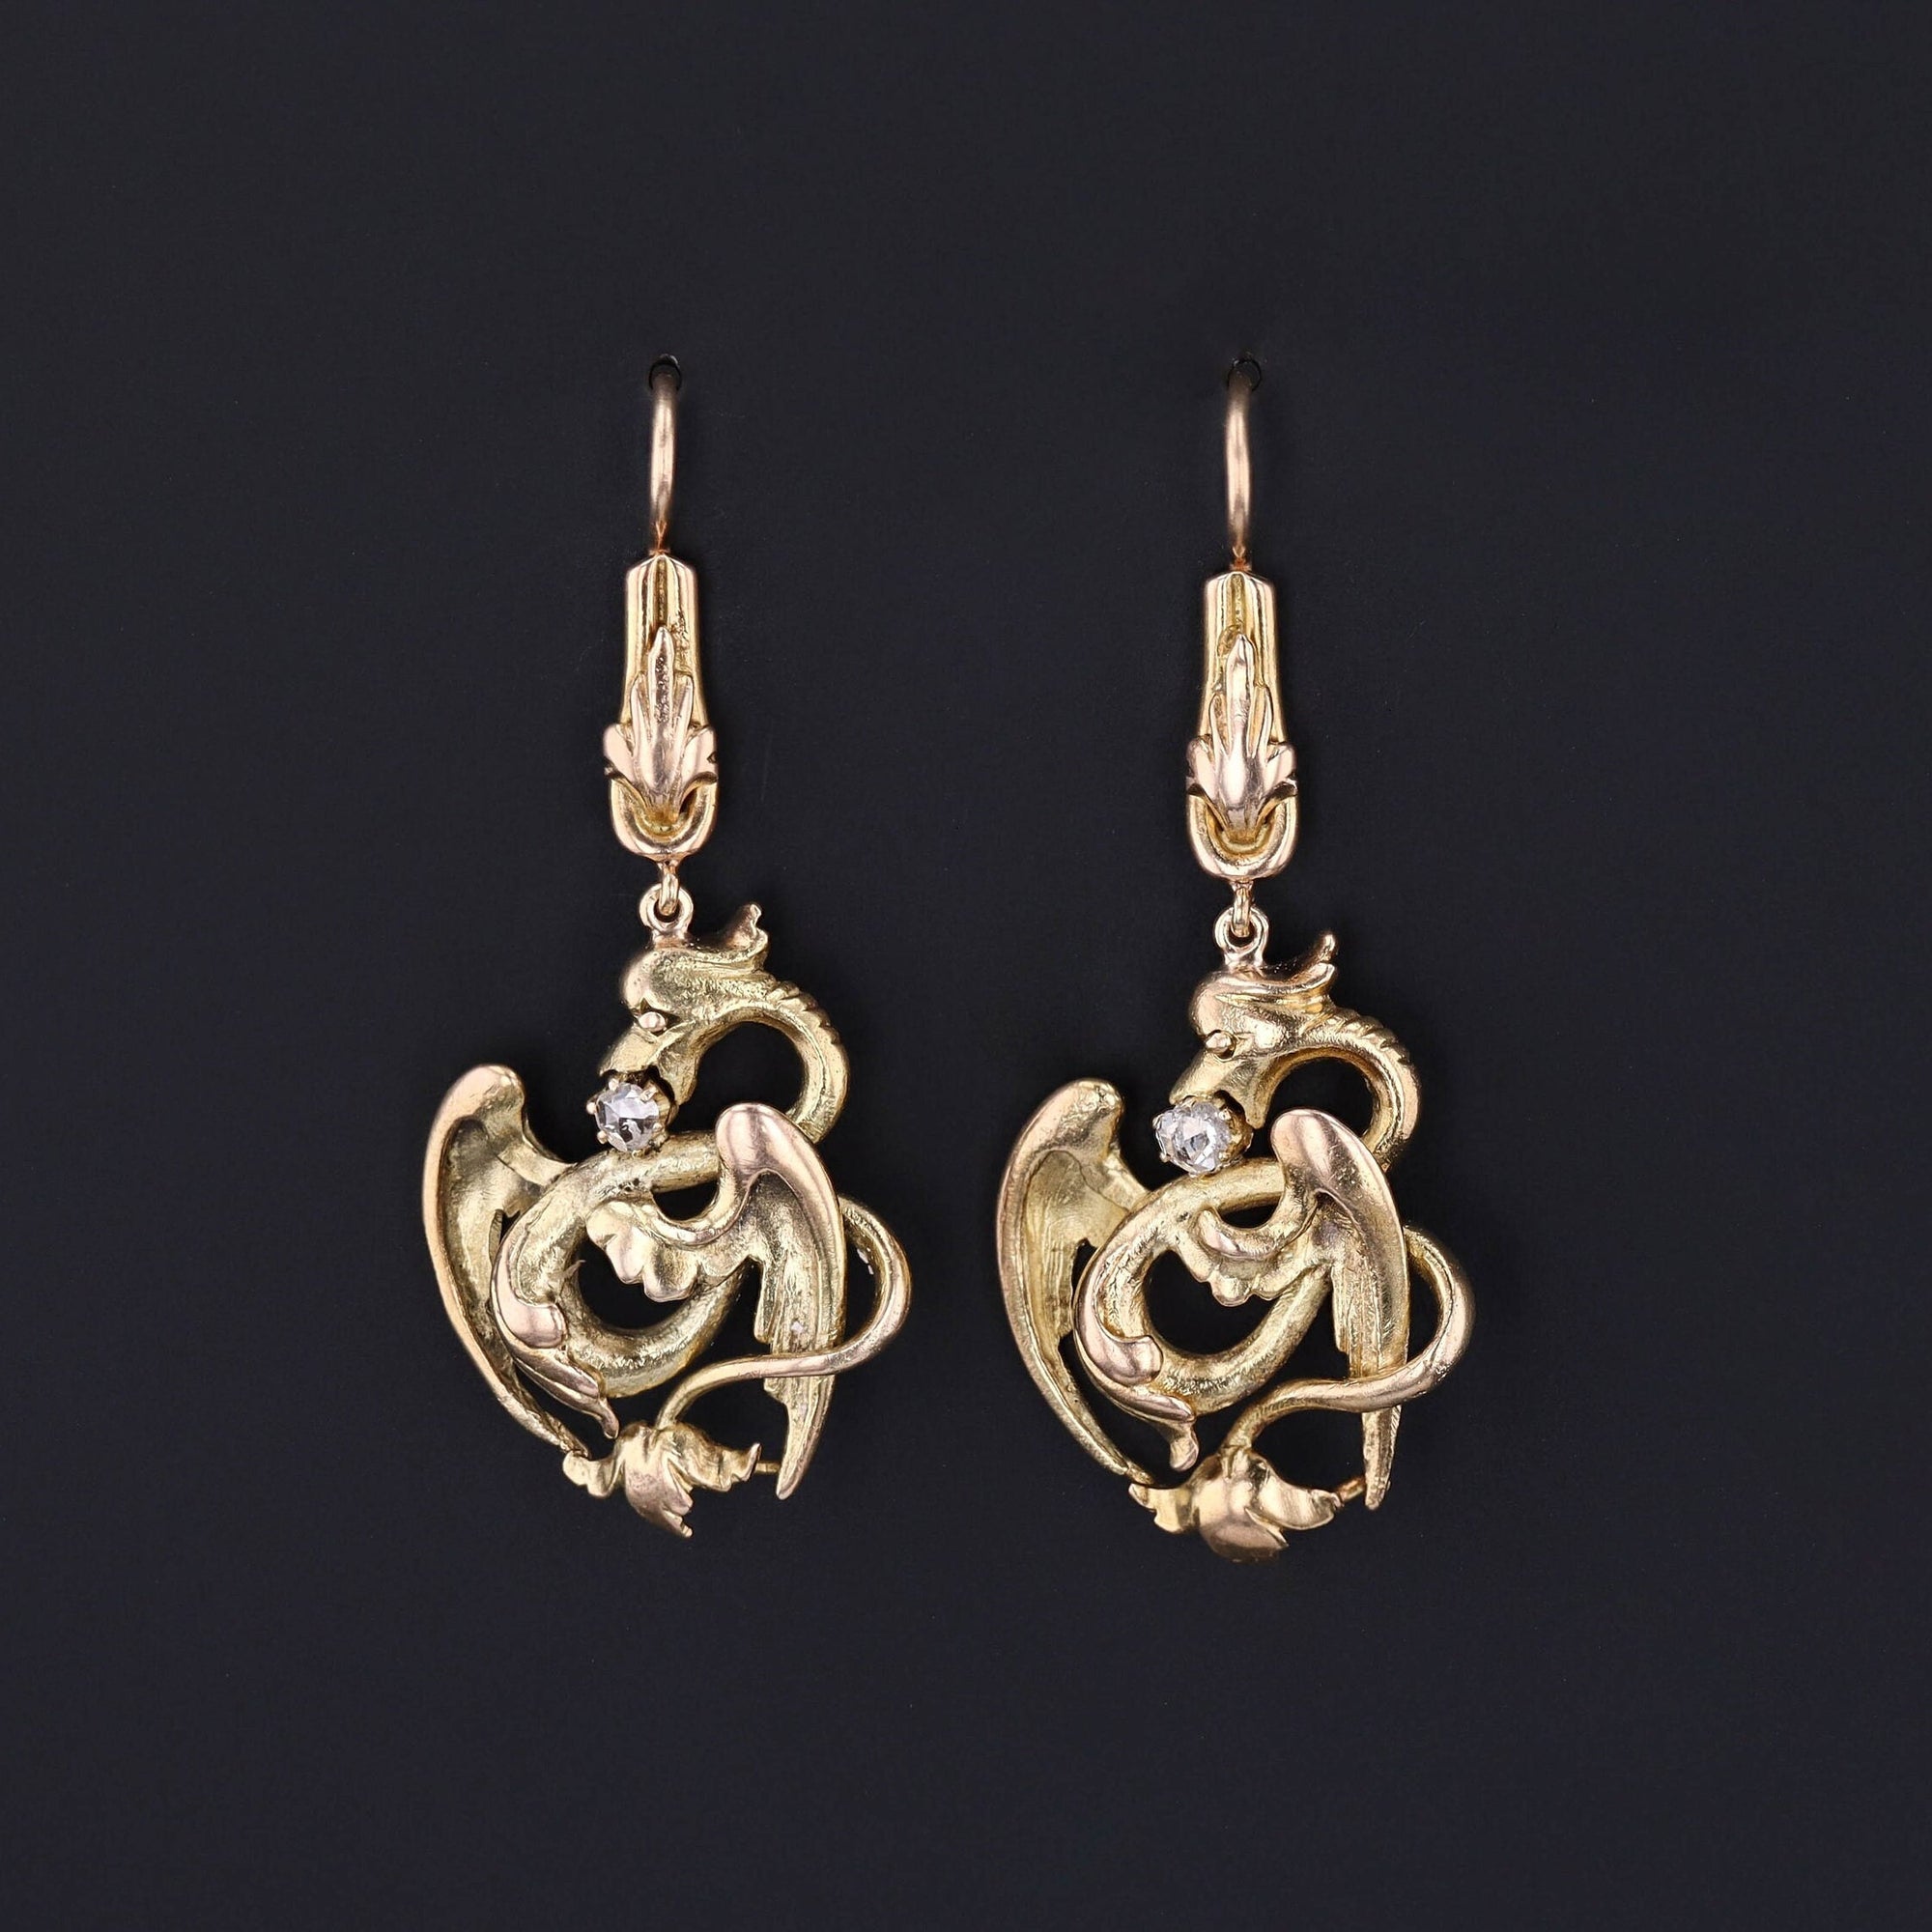 Antique Dragon Conversion Earrings of 14k Gold